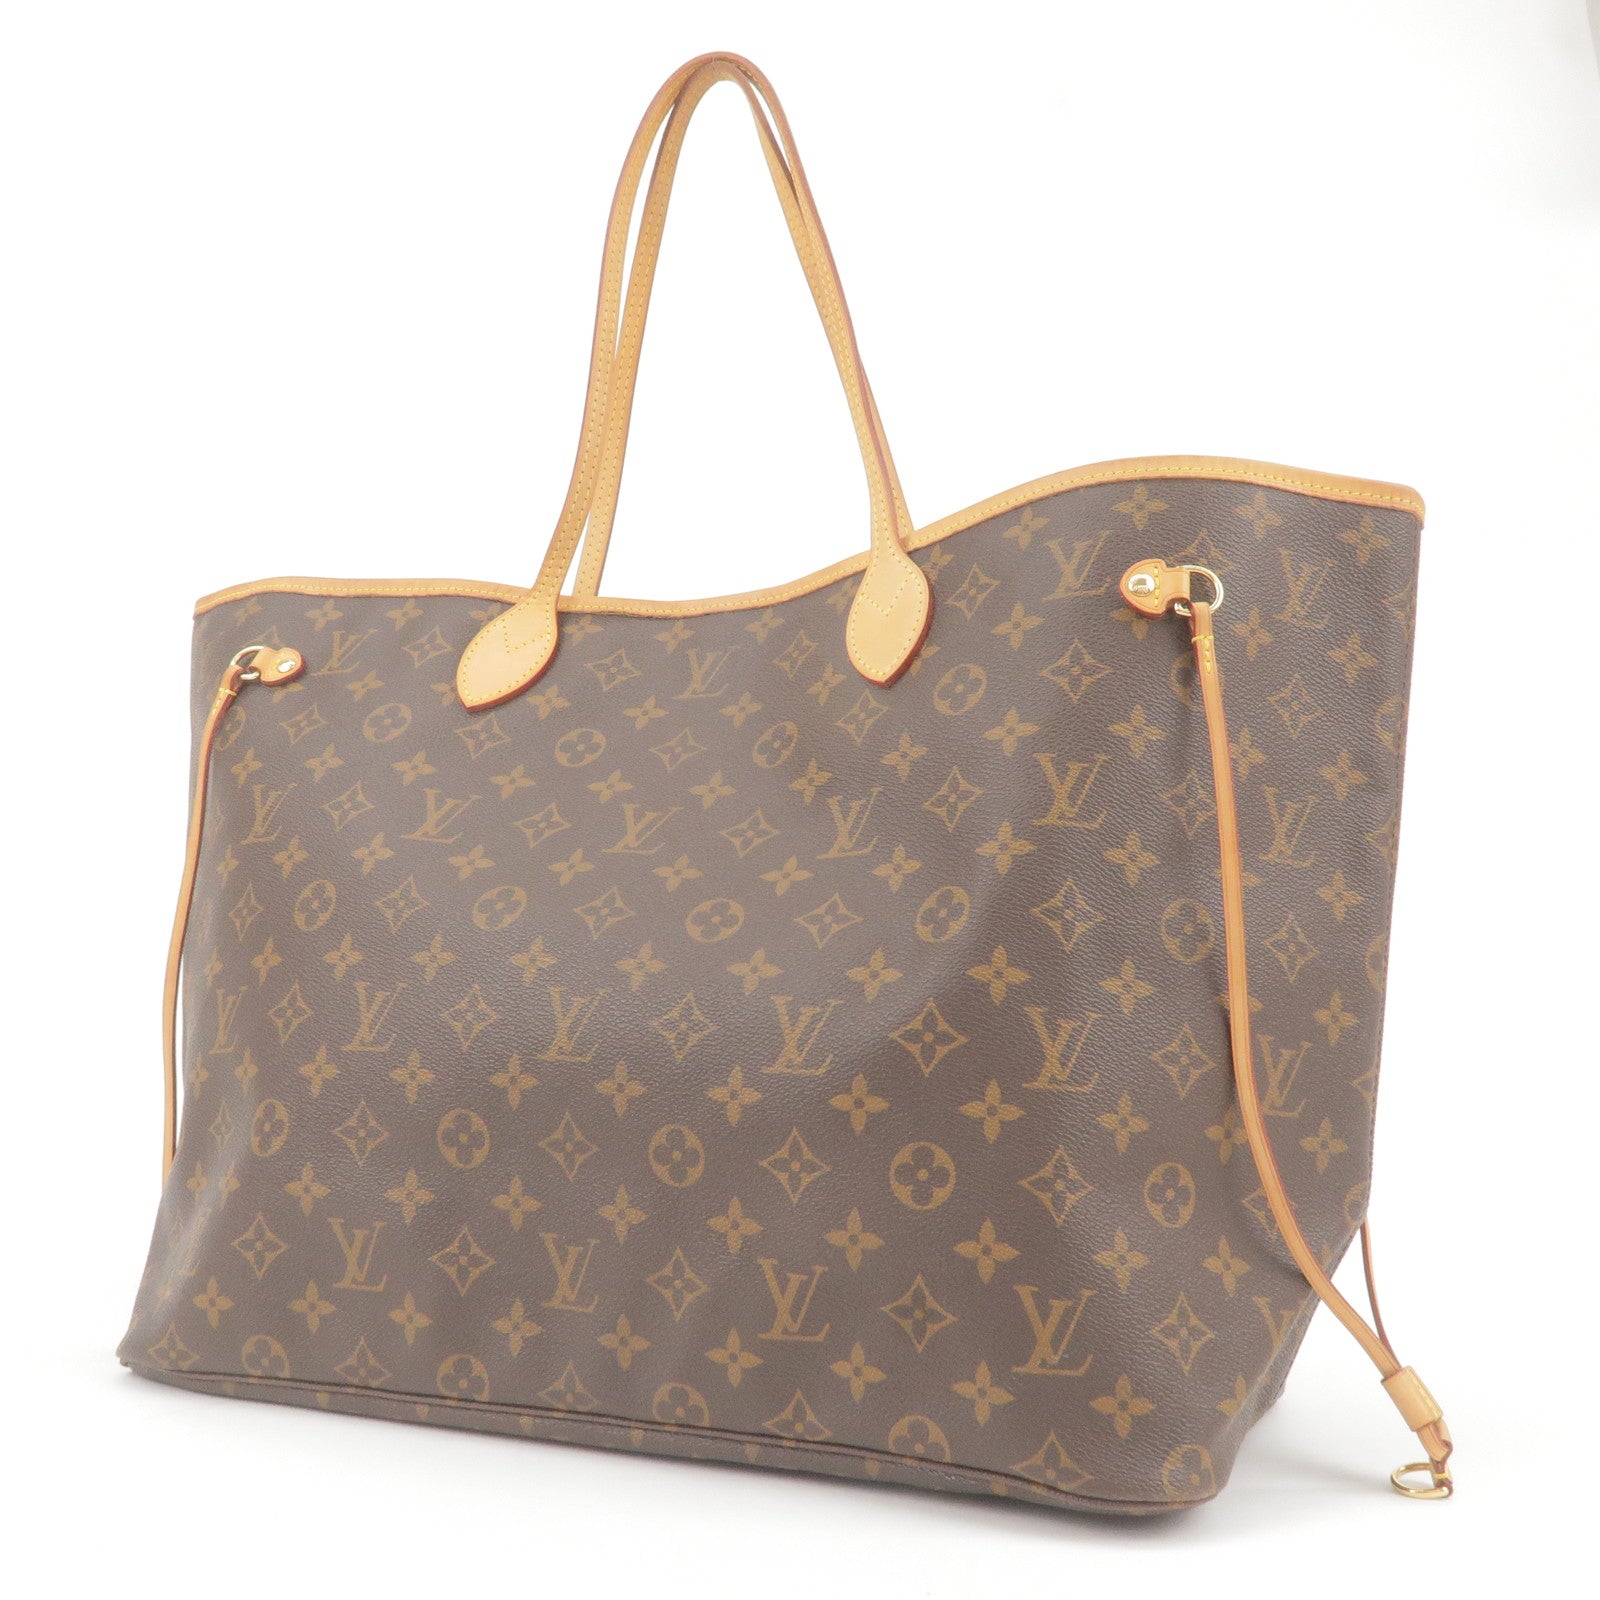 L.V Neverfull PM Monogram Like new condition With box, db, papers